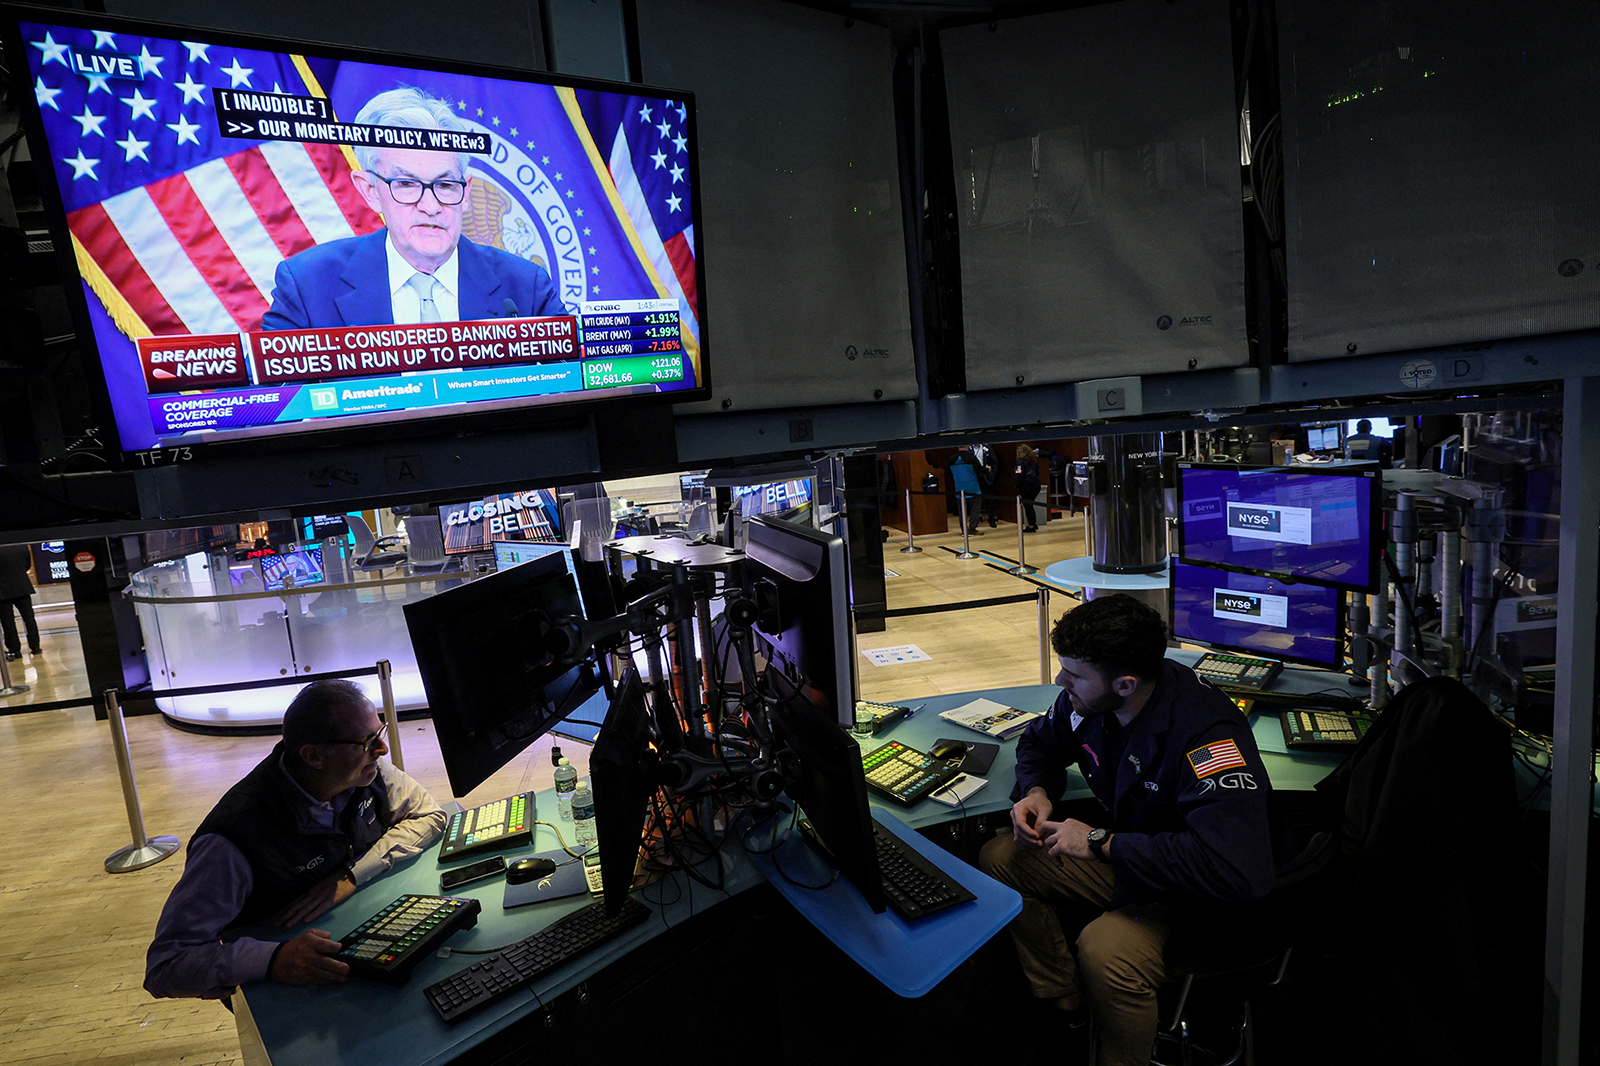 Traders react as Federal Reserve Chair Jerome Powell is seen delivering remarks on a screen, on the floor of the New York Stock Exchange on March 22.